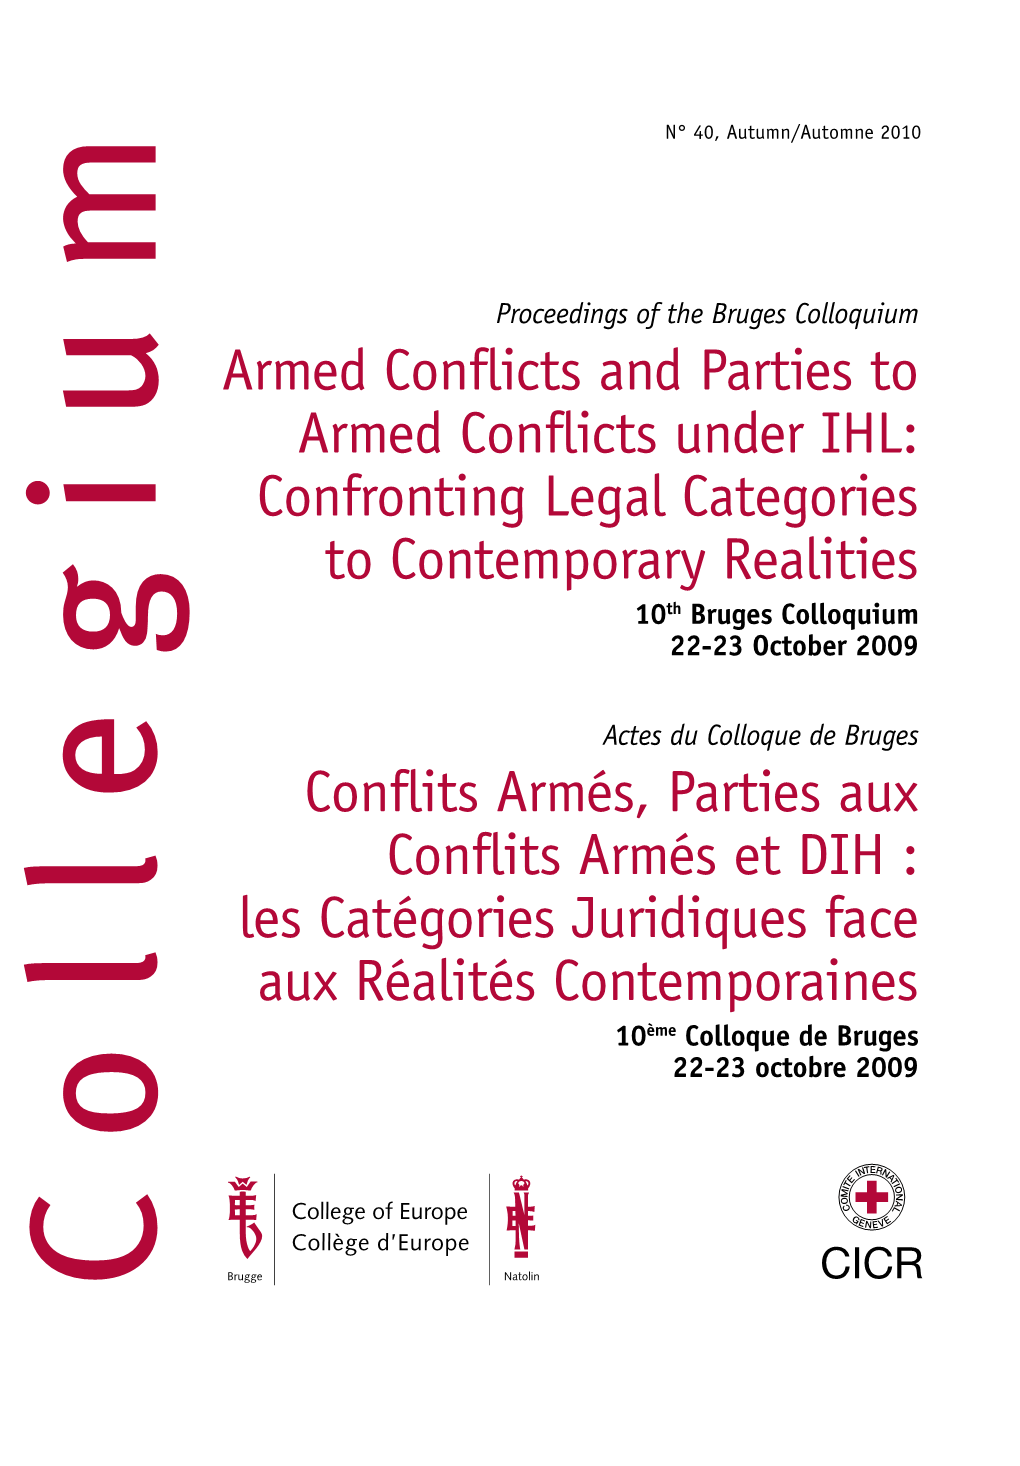 Armed Conflicts and Parties to Armed Conflicts Under